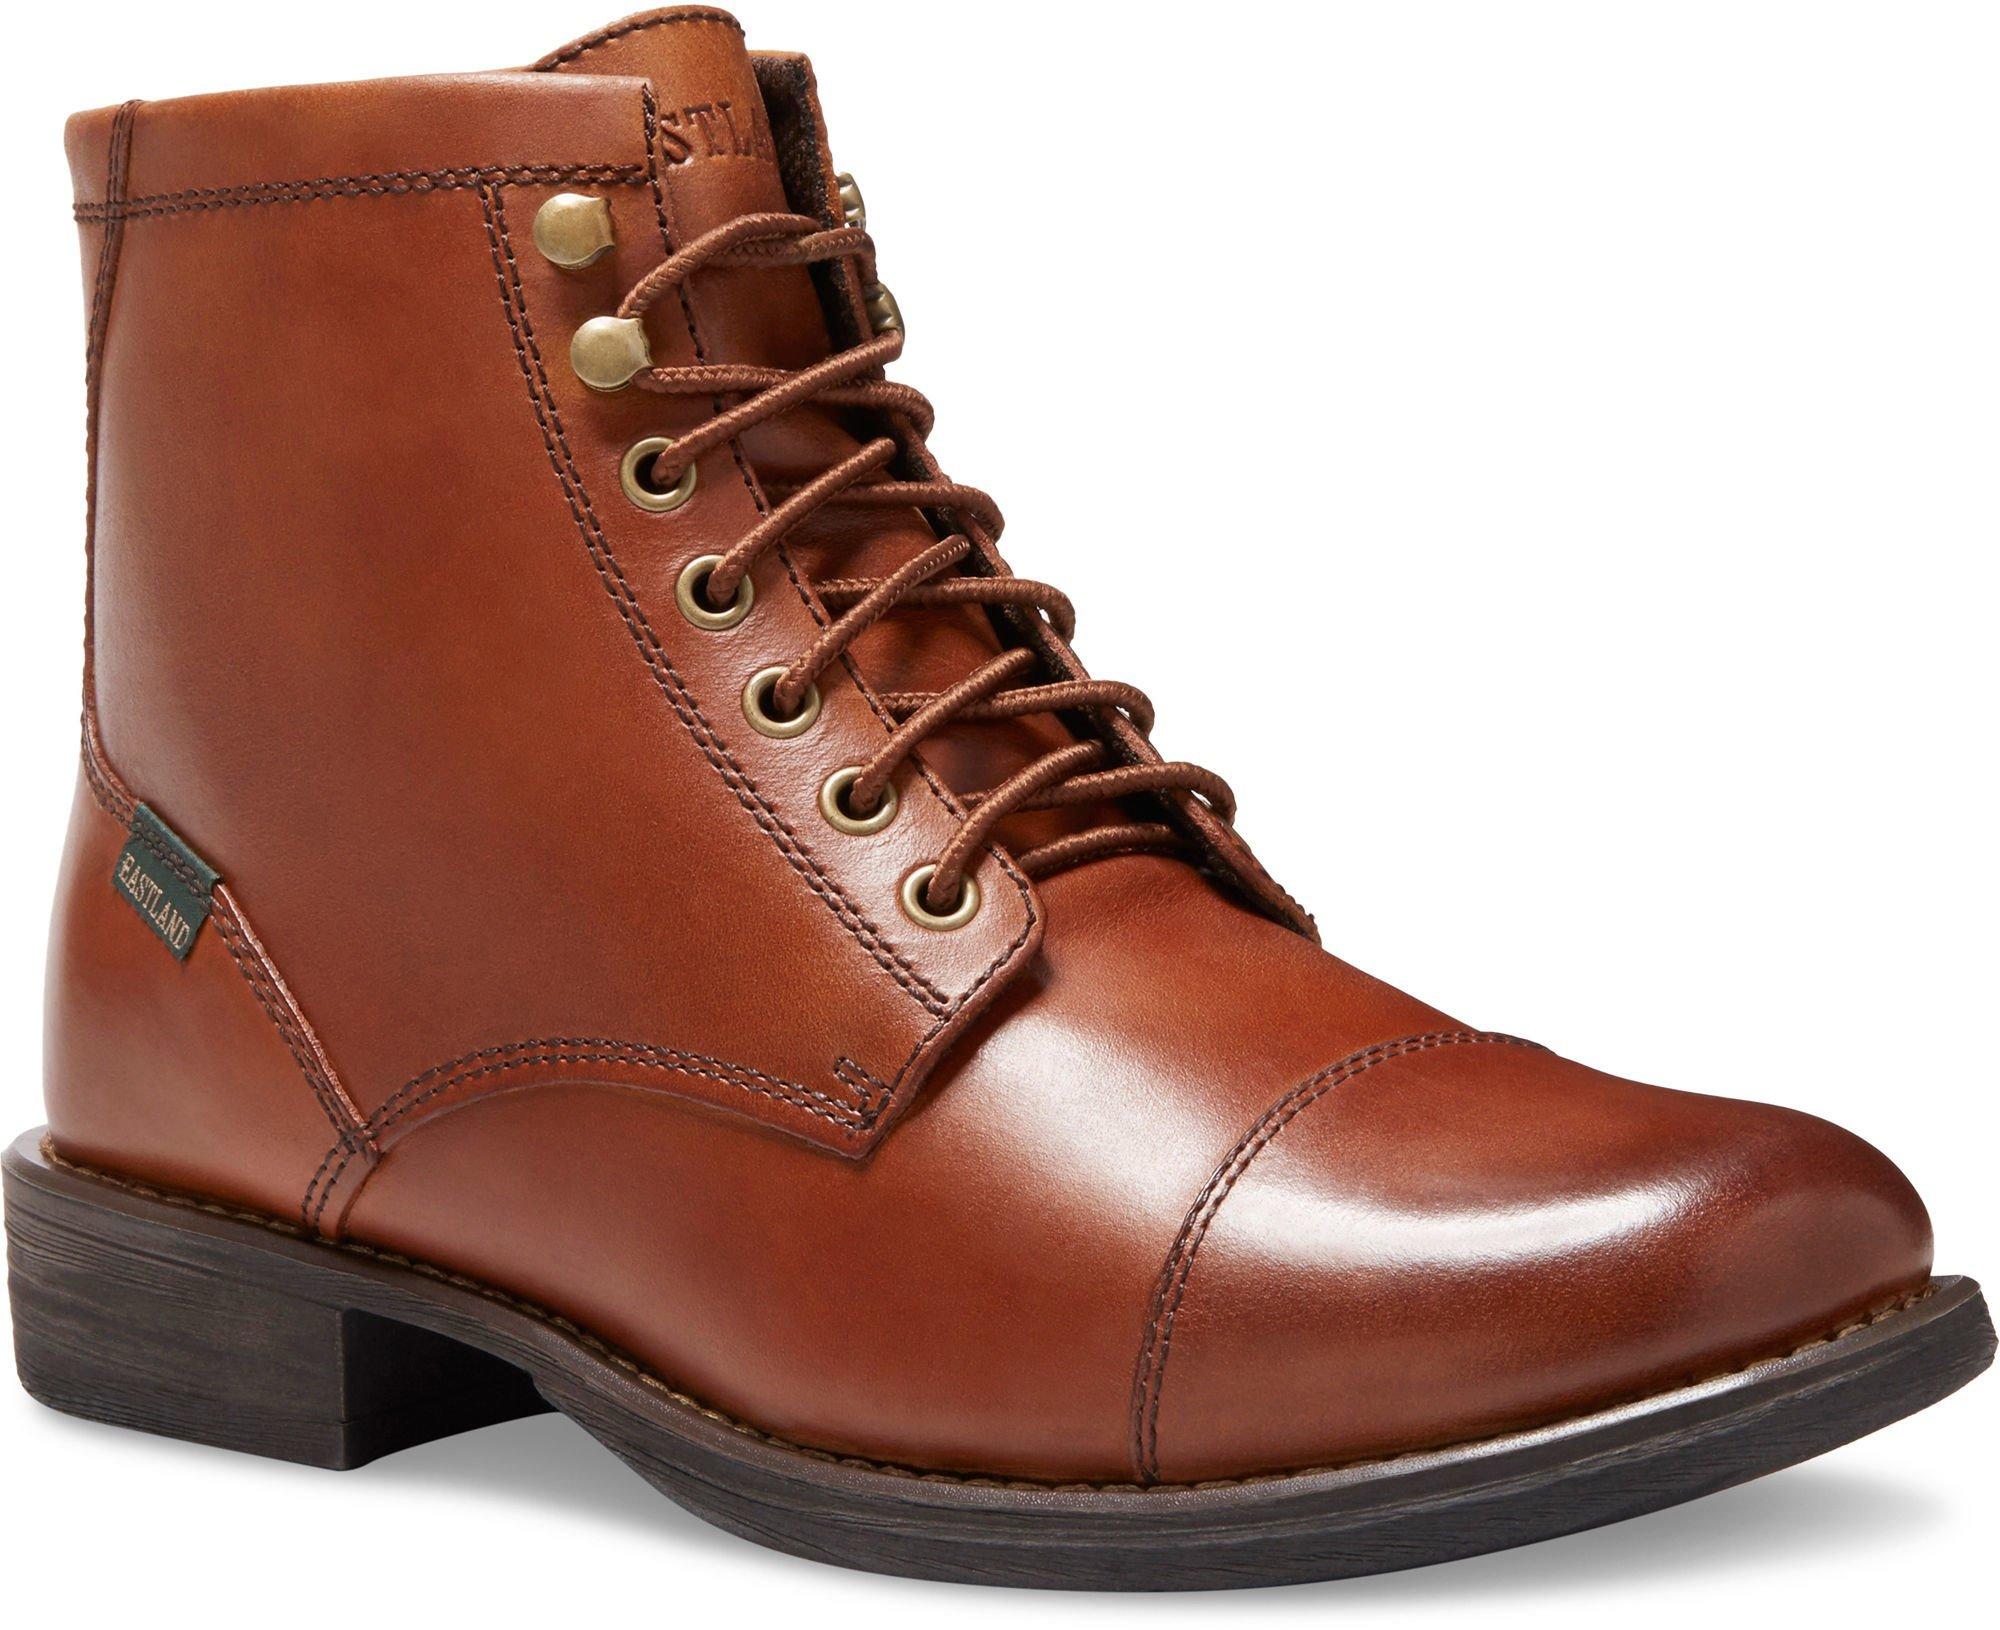 Mens High Fidelity Boots